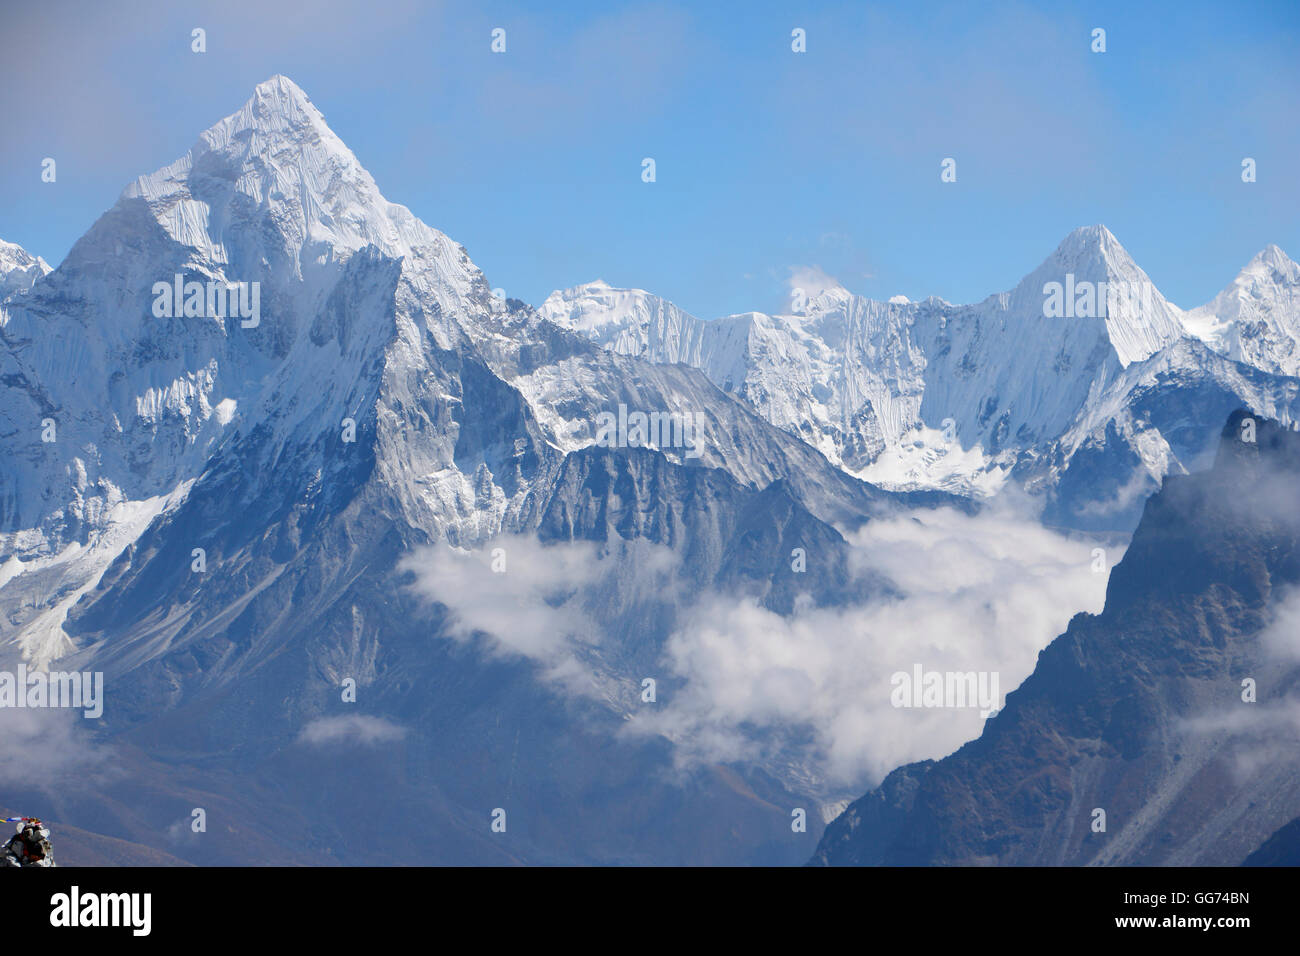 View looking down towards Ama Dablam Peak backdrop from Cho La Pass Stock Photo